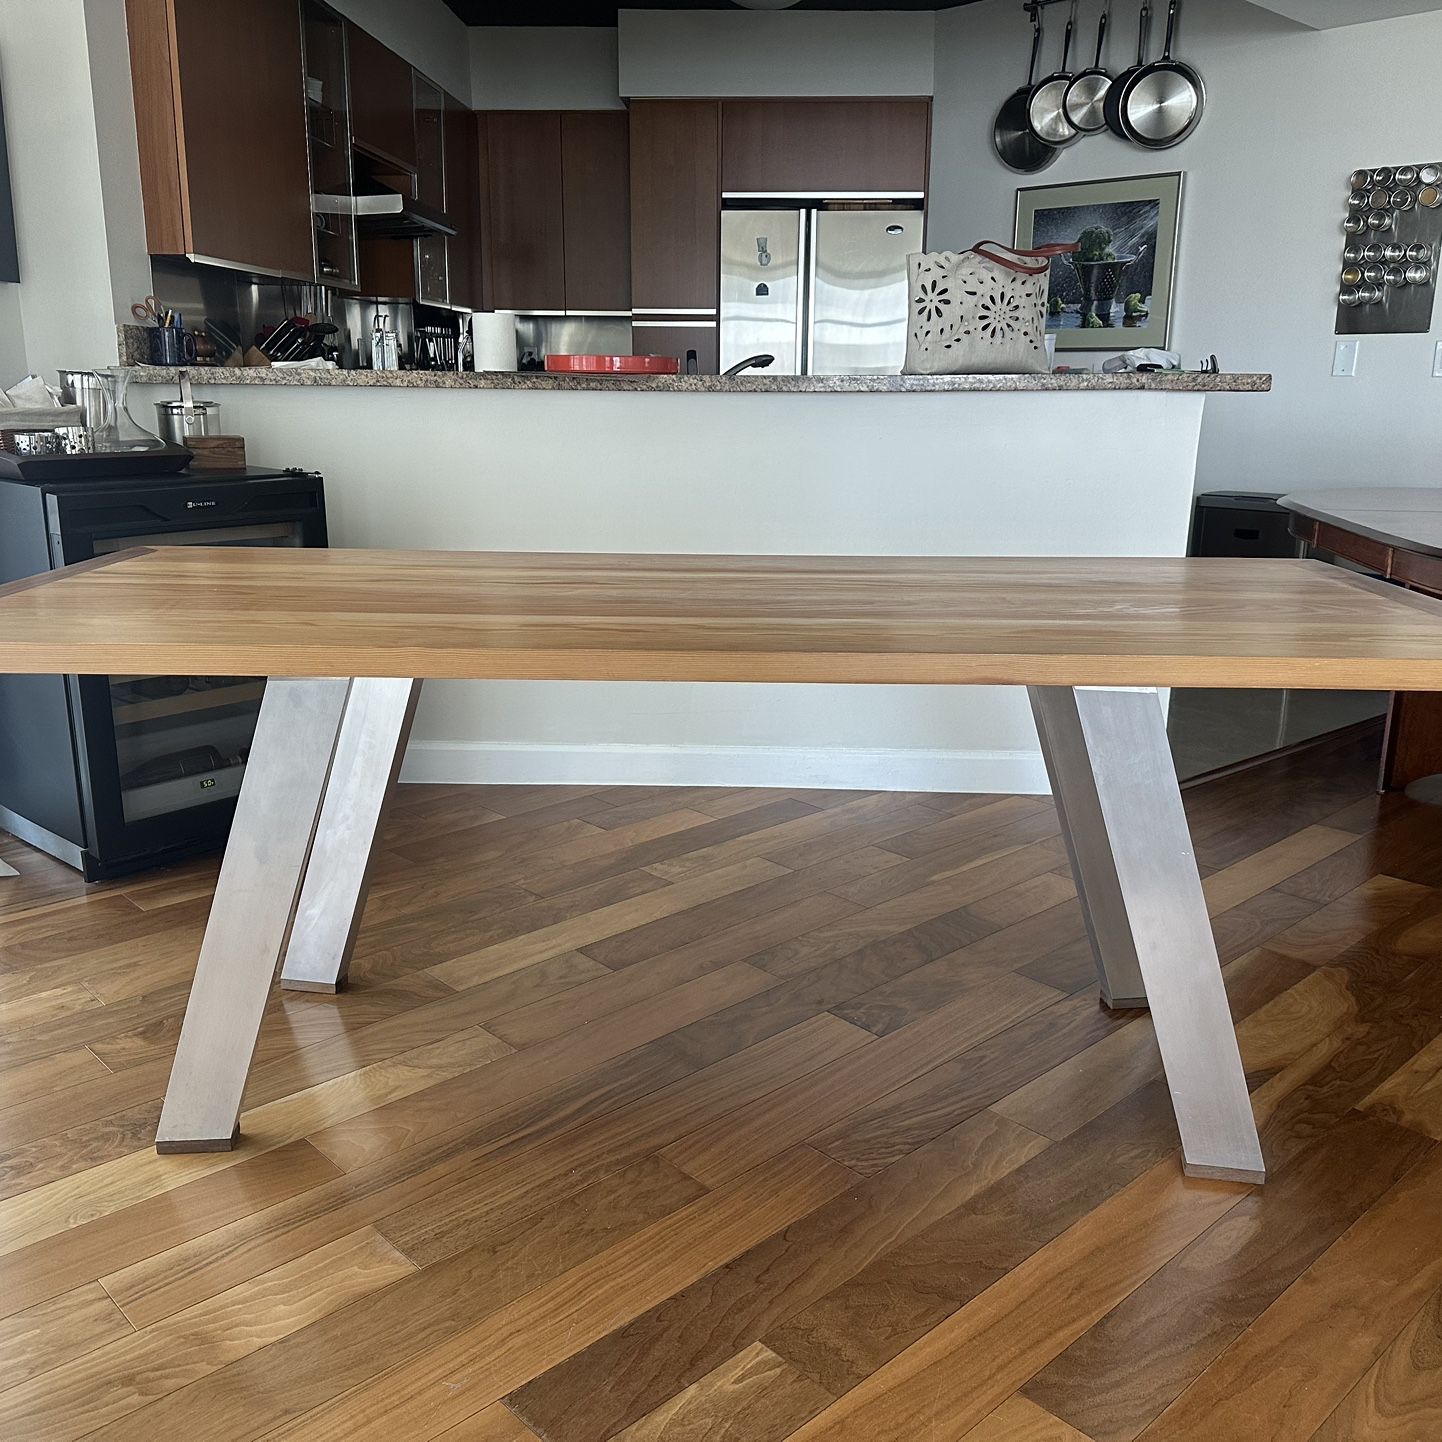 Solid Wood Table With Aluminum Legs - Custom-made